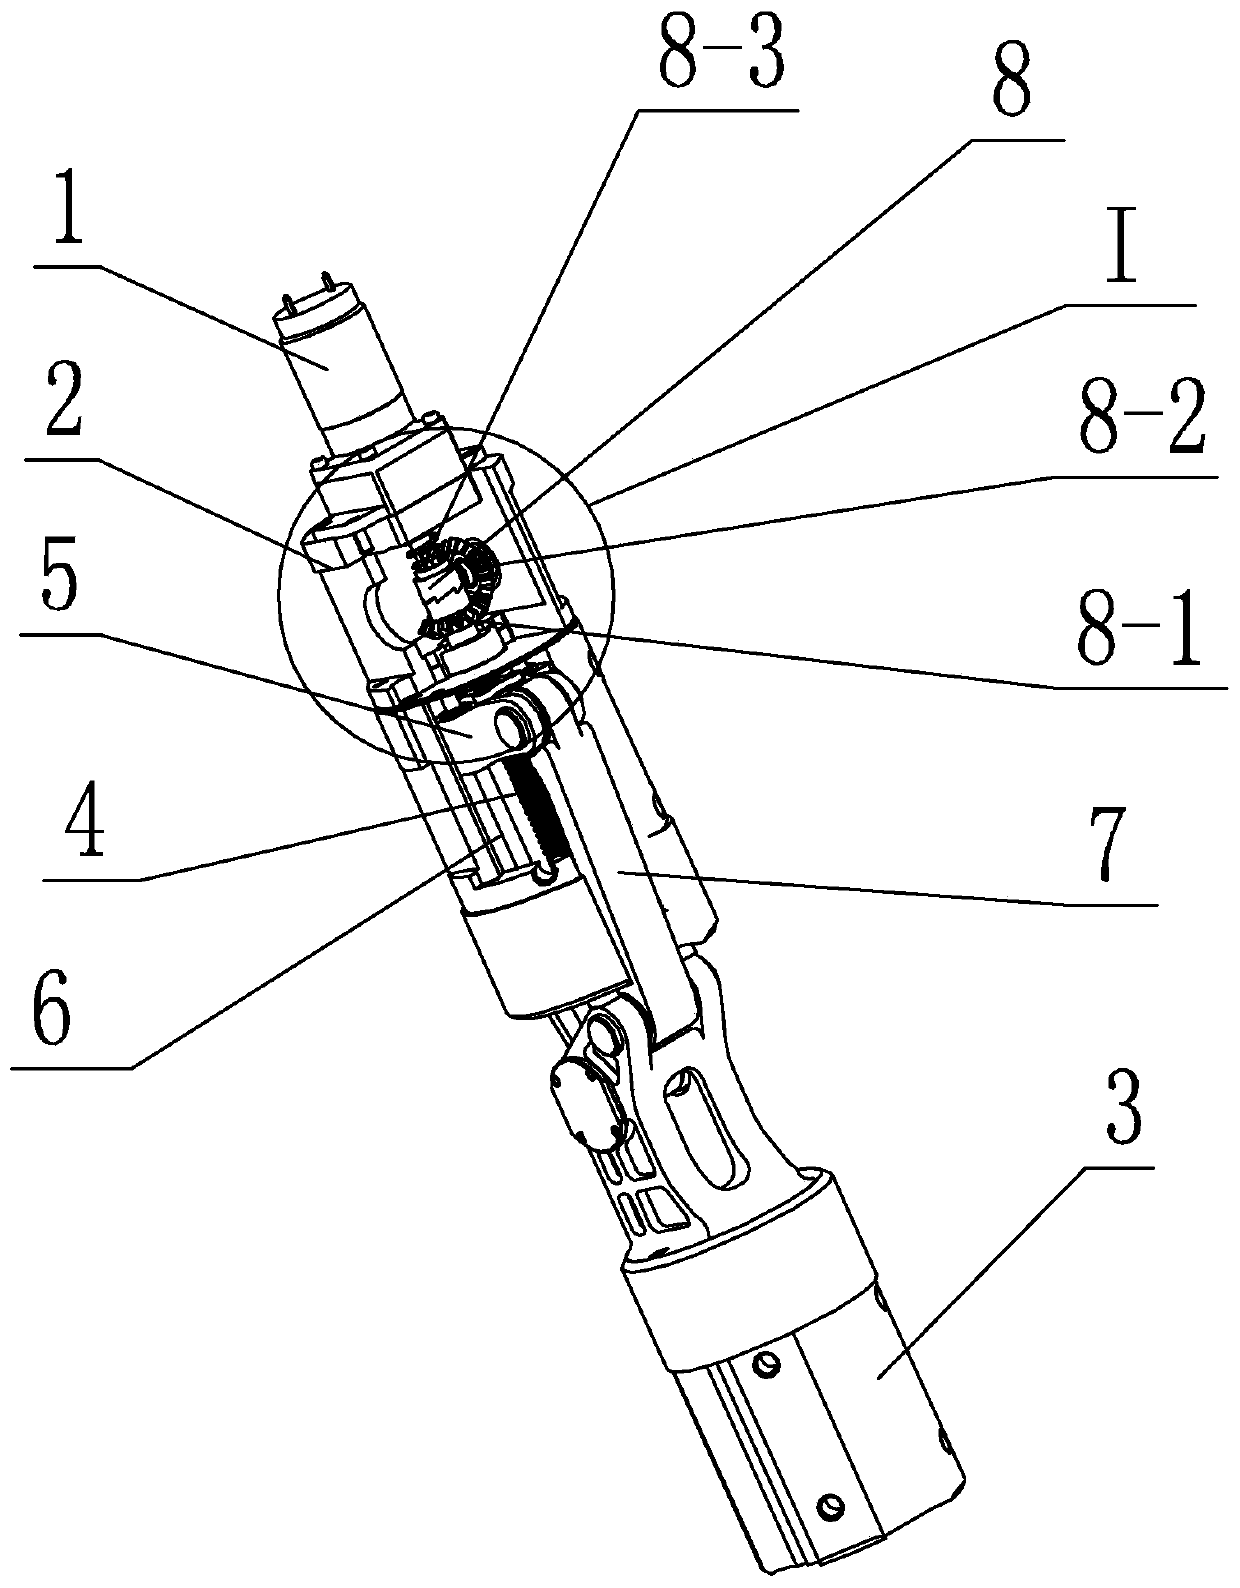 Foldable supporting arm hinged to automatic drive unit and driven by folding lead screw